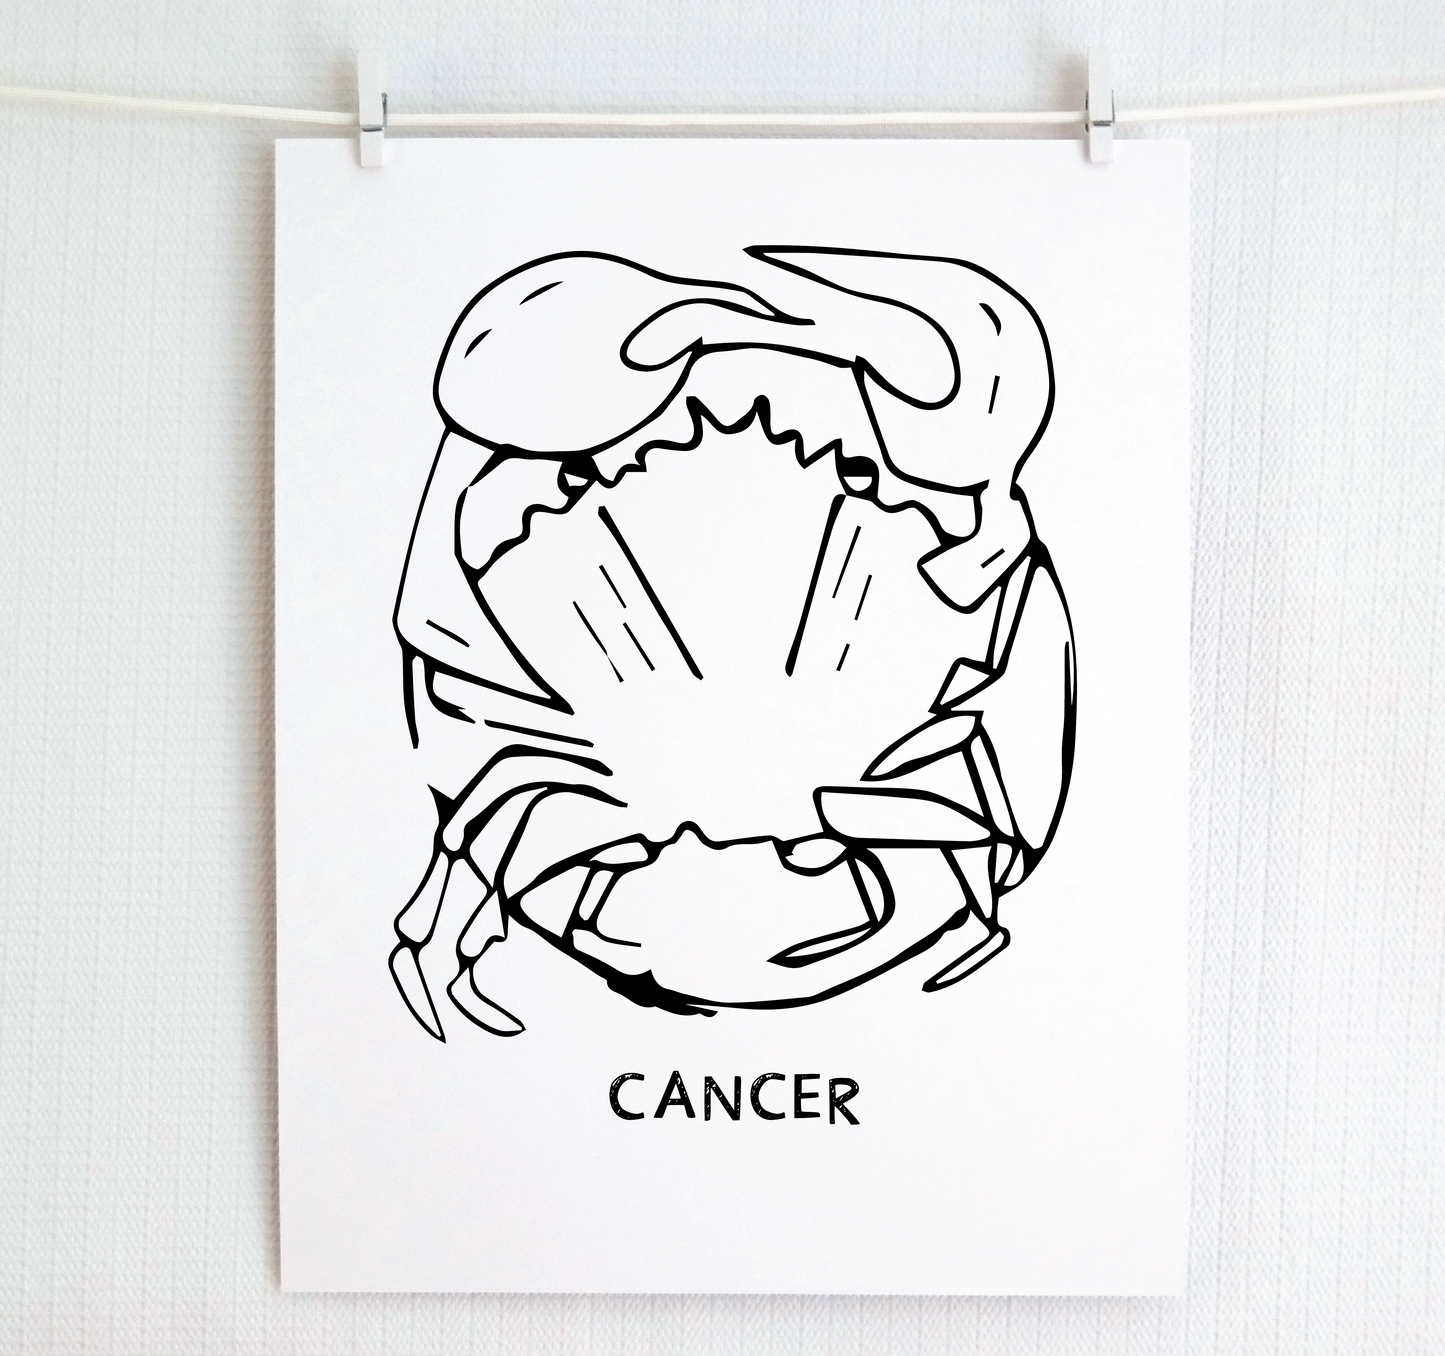 Signs of the Zodiac: CANCER